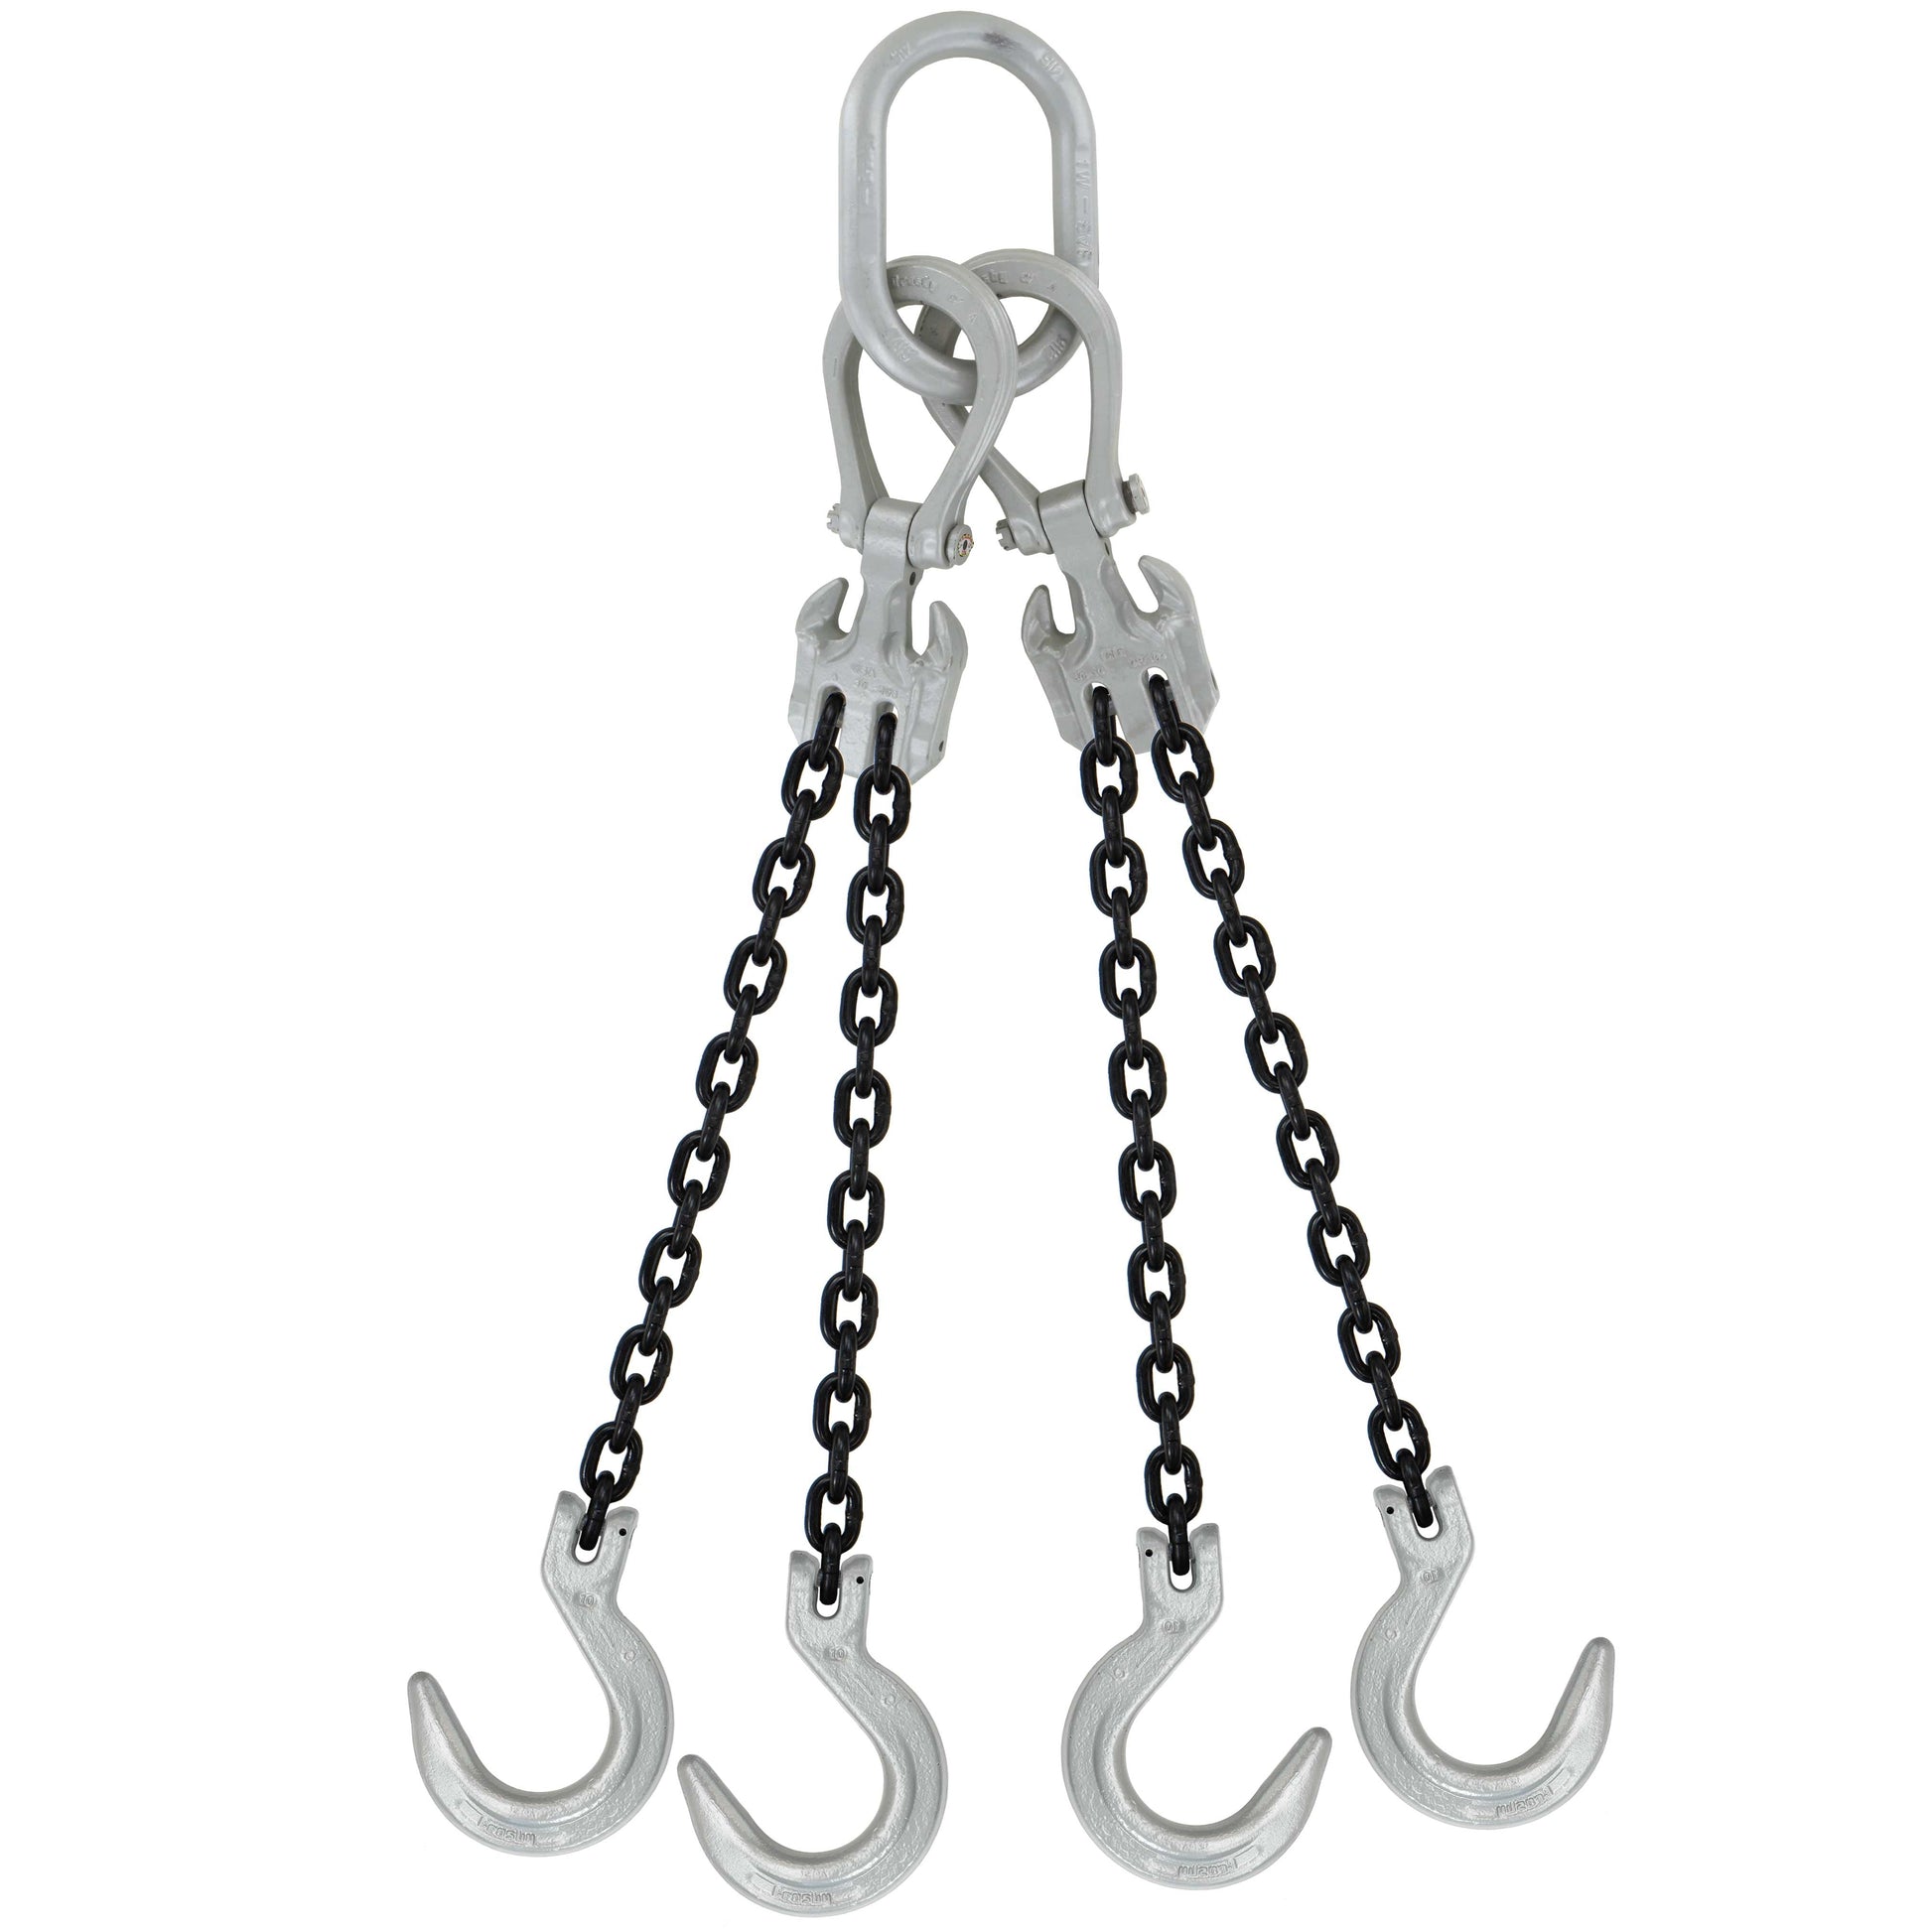 12 inch x 15 foot Domestic Adjustable 4 Leg Chain Sling w Crosby Foundry Hooks Grade 100 image 1 of 2